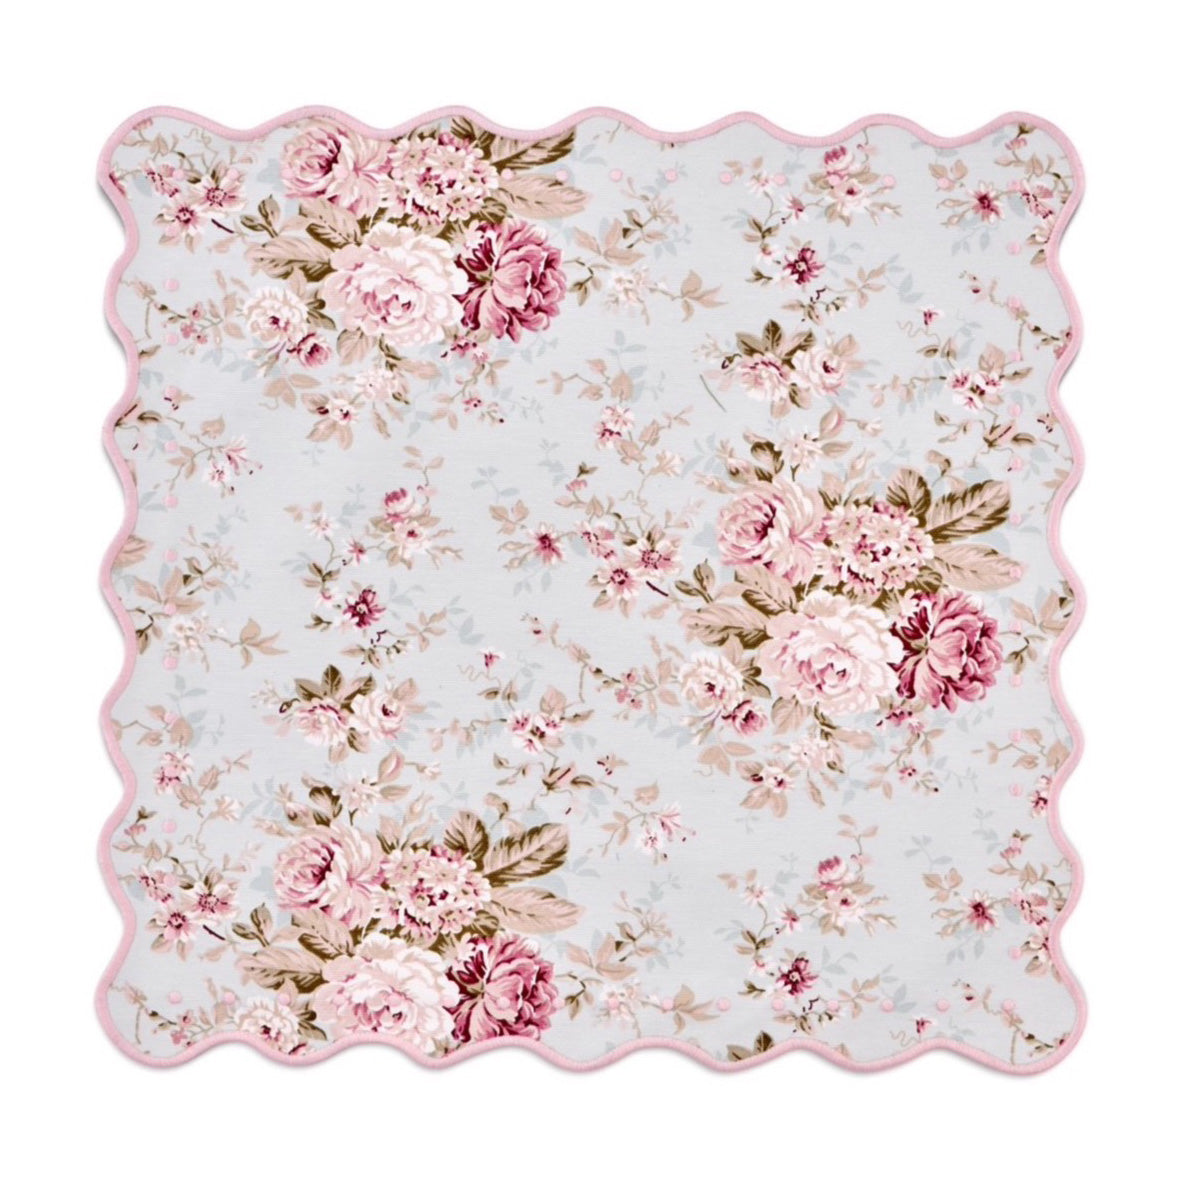 OTM Exclusive: Delphine Placemat and Napkin Set in Sea Foam with Blush Embroidery